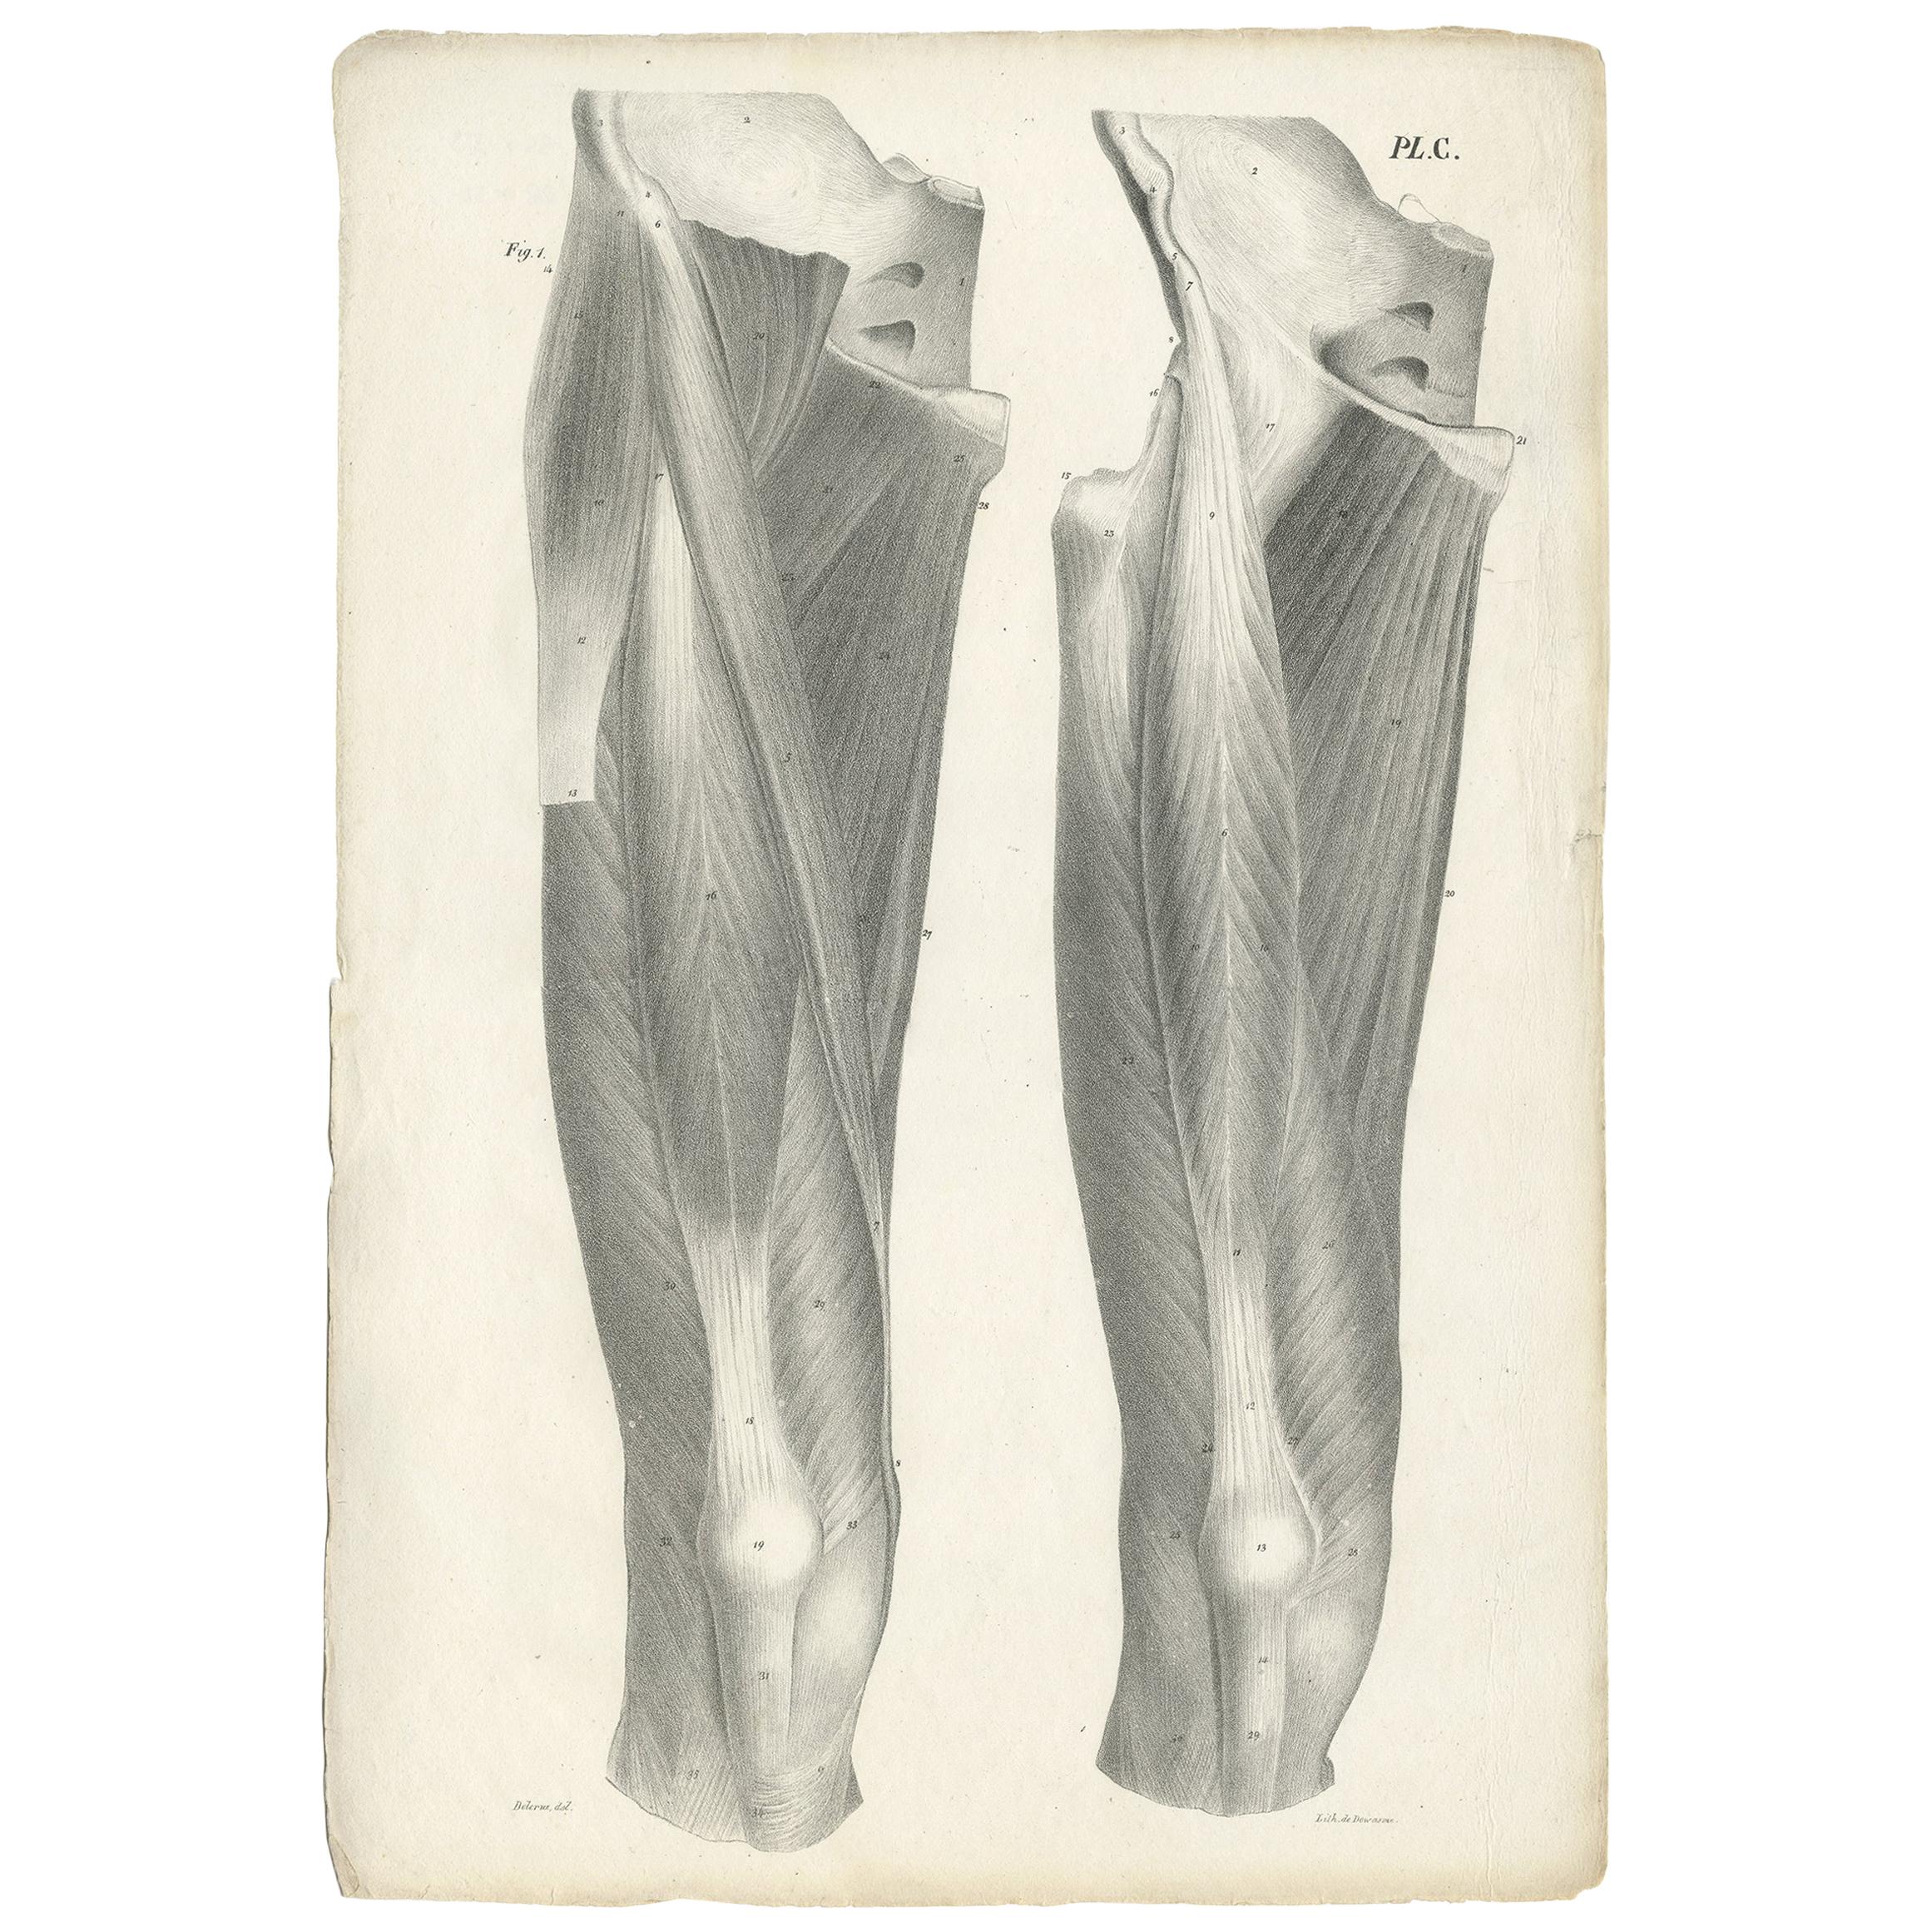 Pl. C Antique Anatomy / Medical Print of the Thigh by Cloquet '1821'